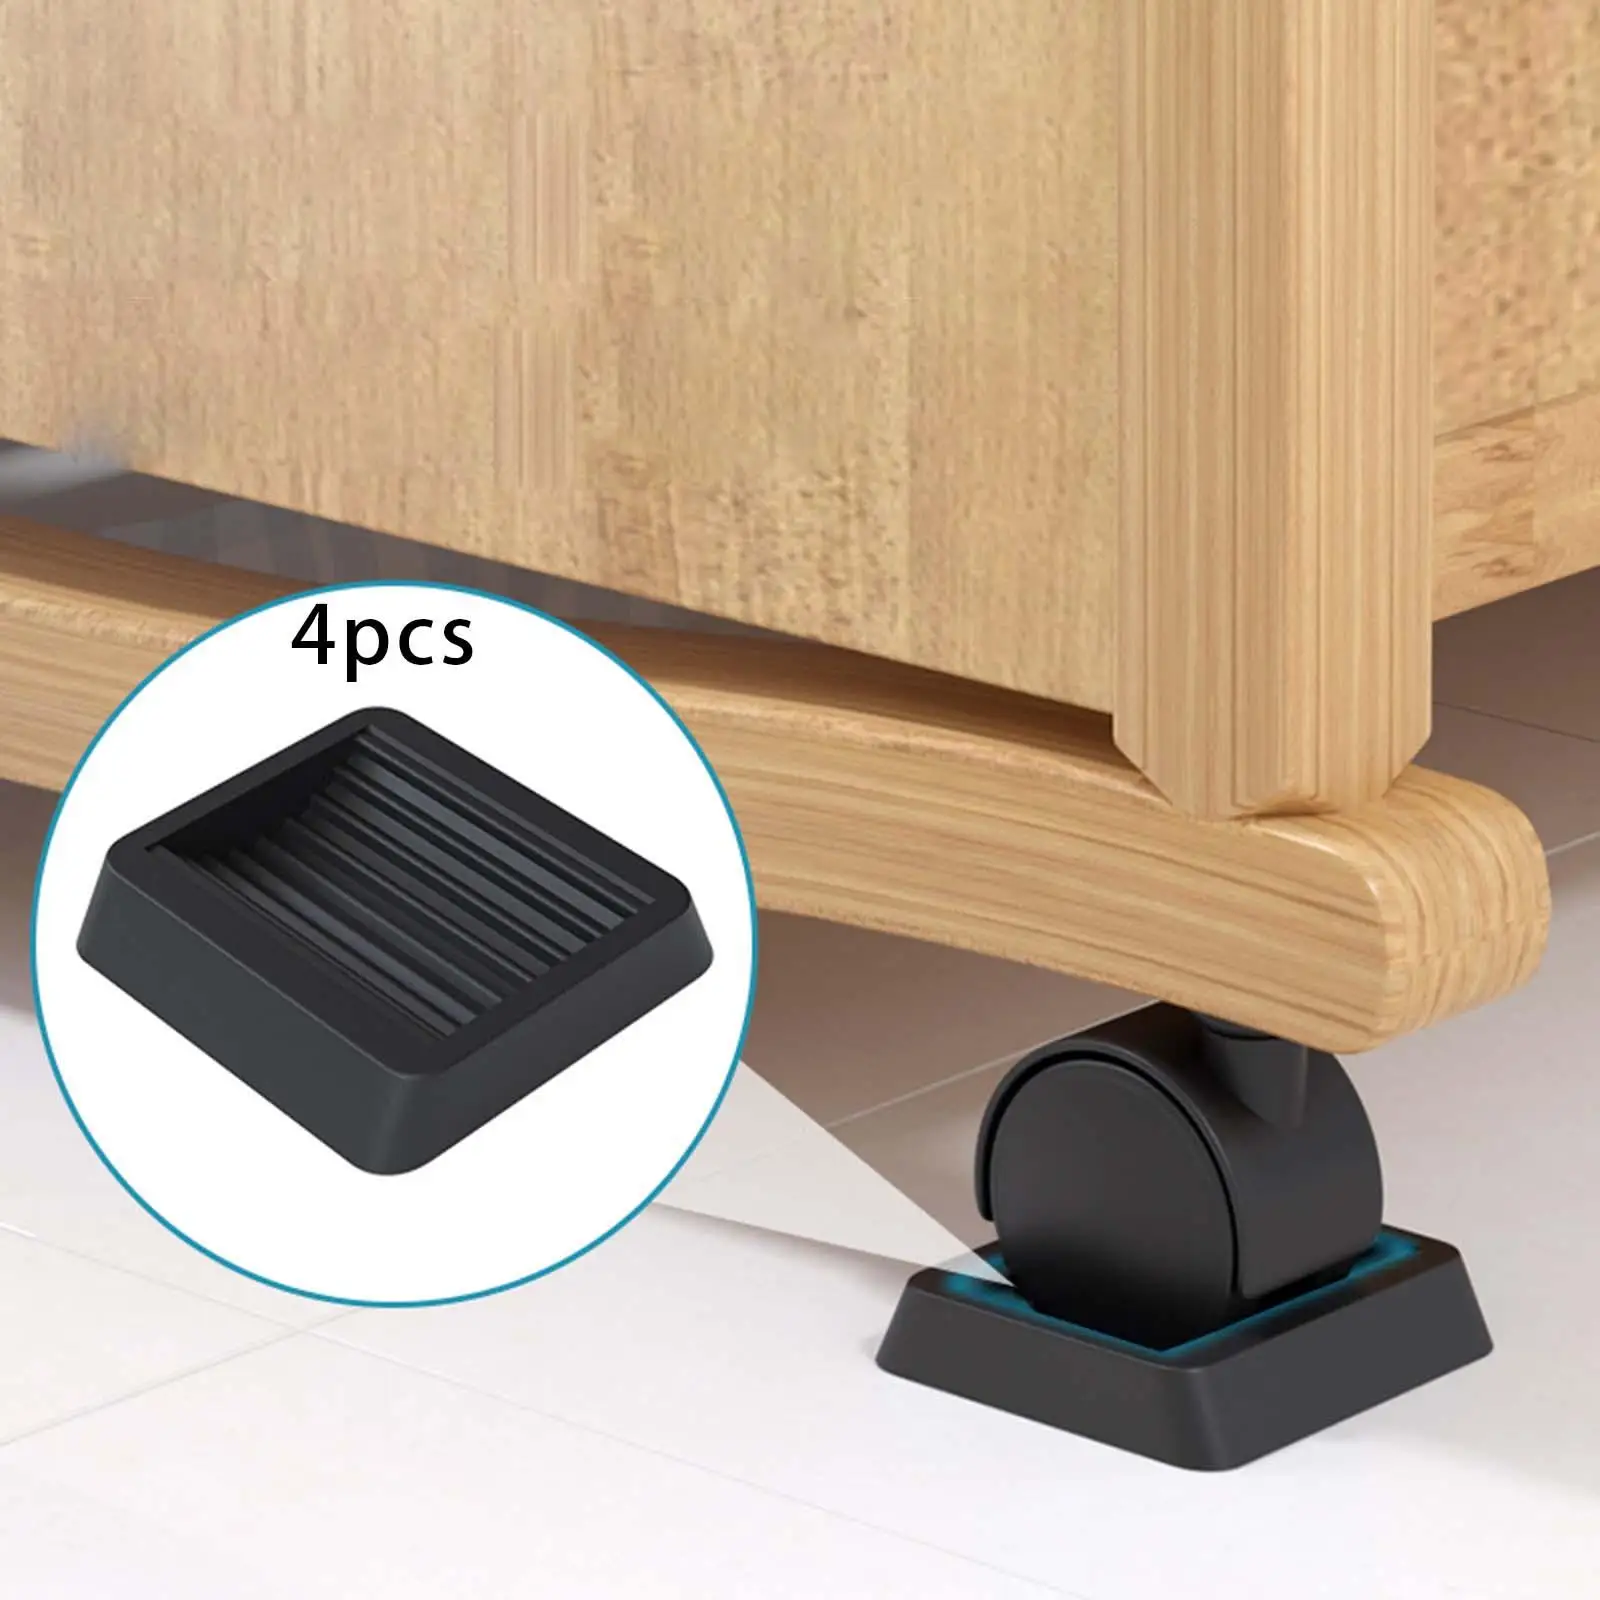 4Pcs Caster Cups Easy Use Chair Leg Floor Protectors Protector Pads Bed Frame Wheel Stoppers Hardwood Floor Protectors for Chair